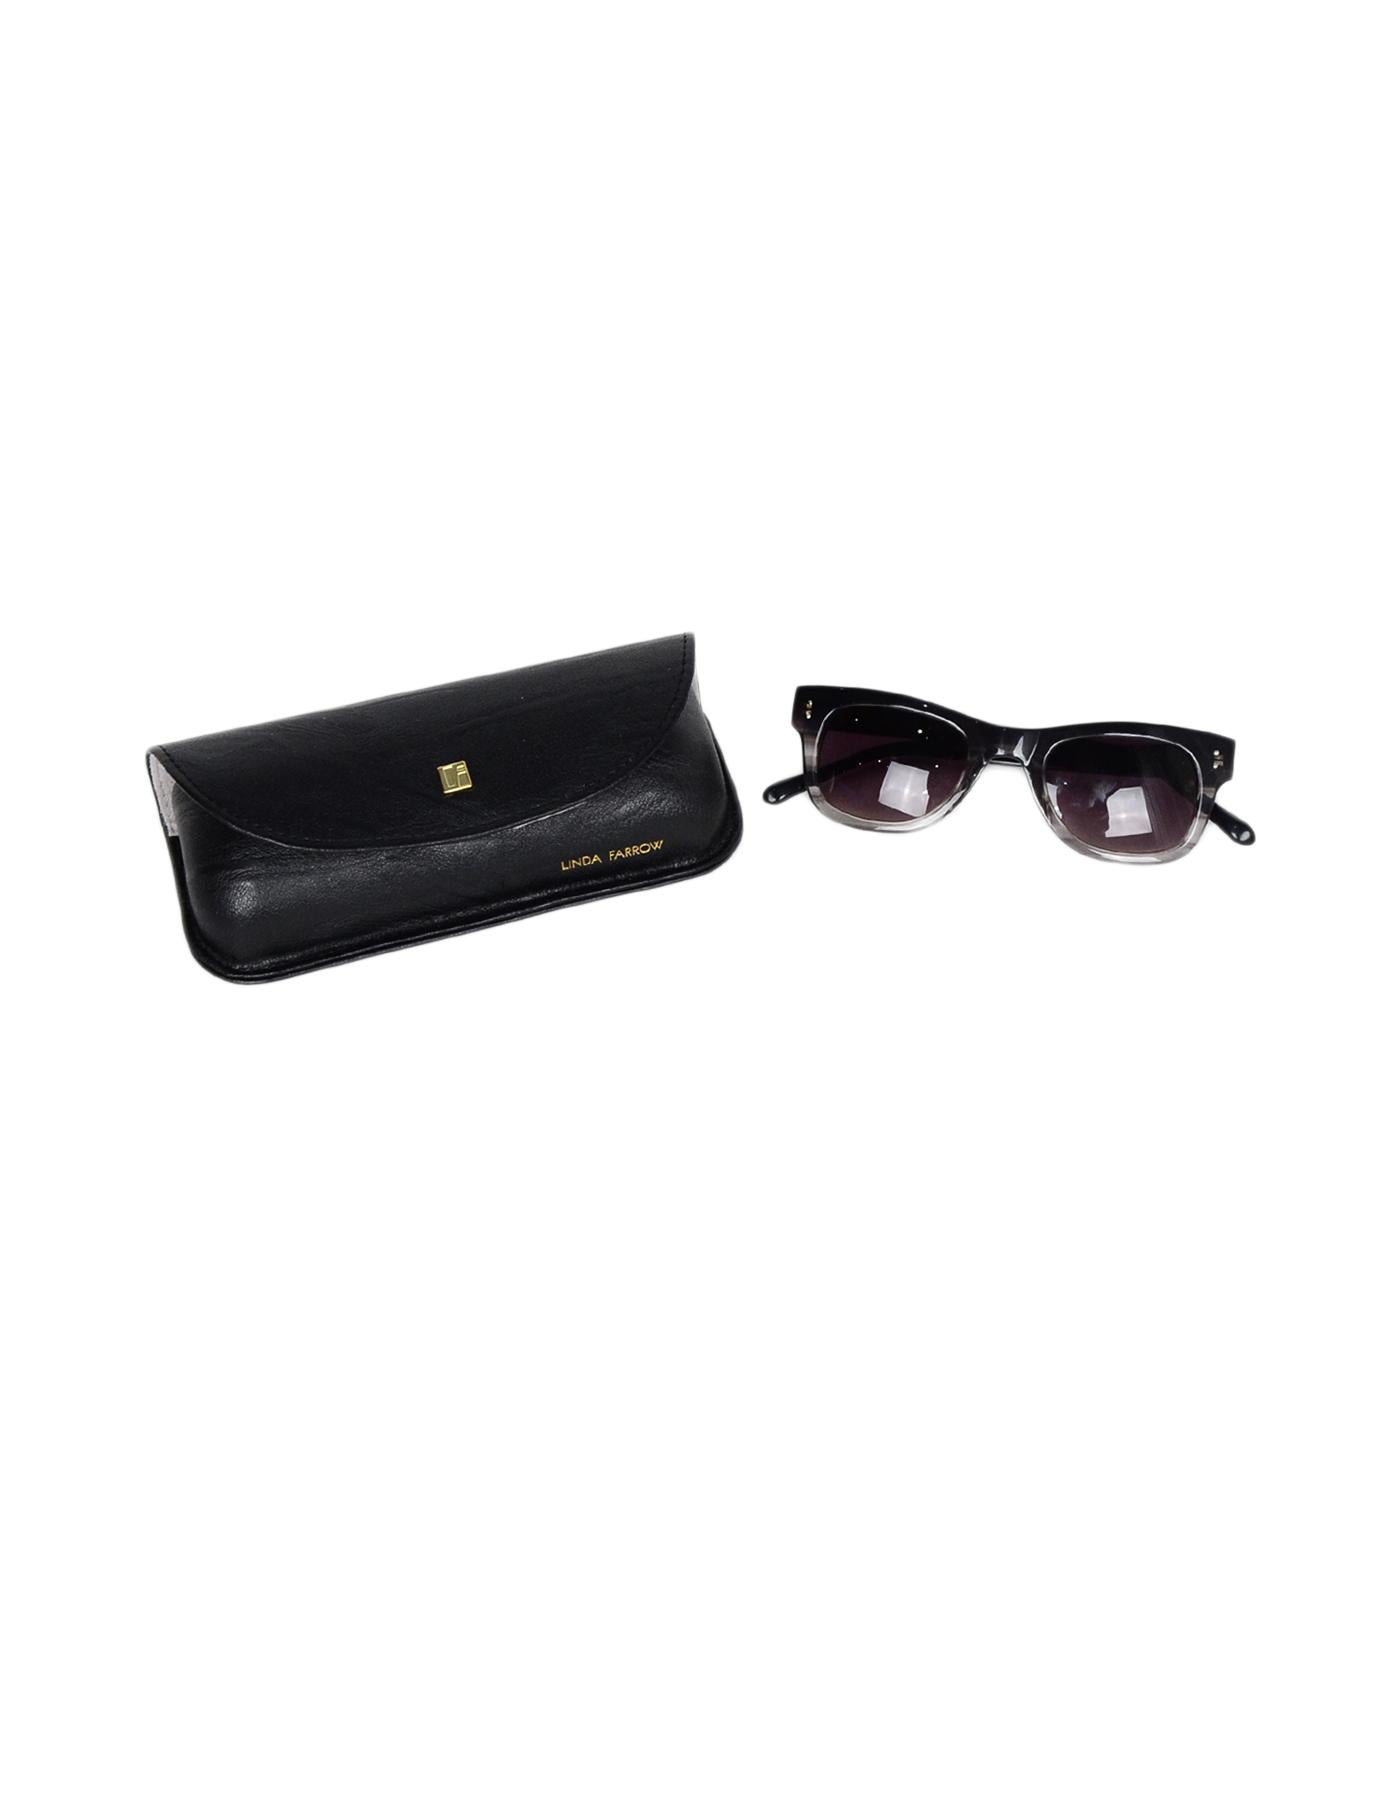 Linda Farrow Luxe Black/Grey Ombre Sunglasses W/ Case

Color: Black/grey
Hardware: Silvertone
Materials: Resin, metal
Overall Condition: Excellent pre-owned condition with exception of very minor marks in lenses.
Includes: Case

Measurements: